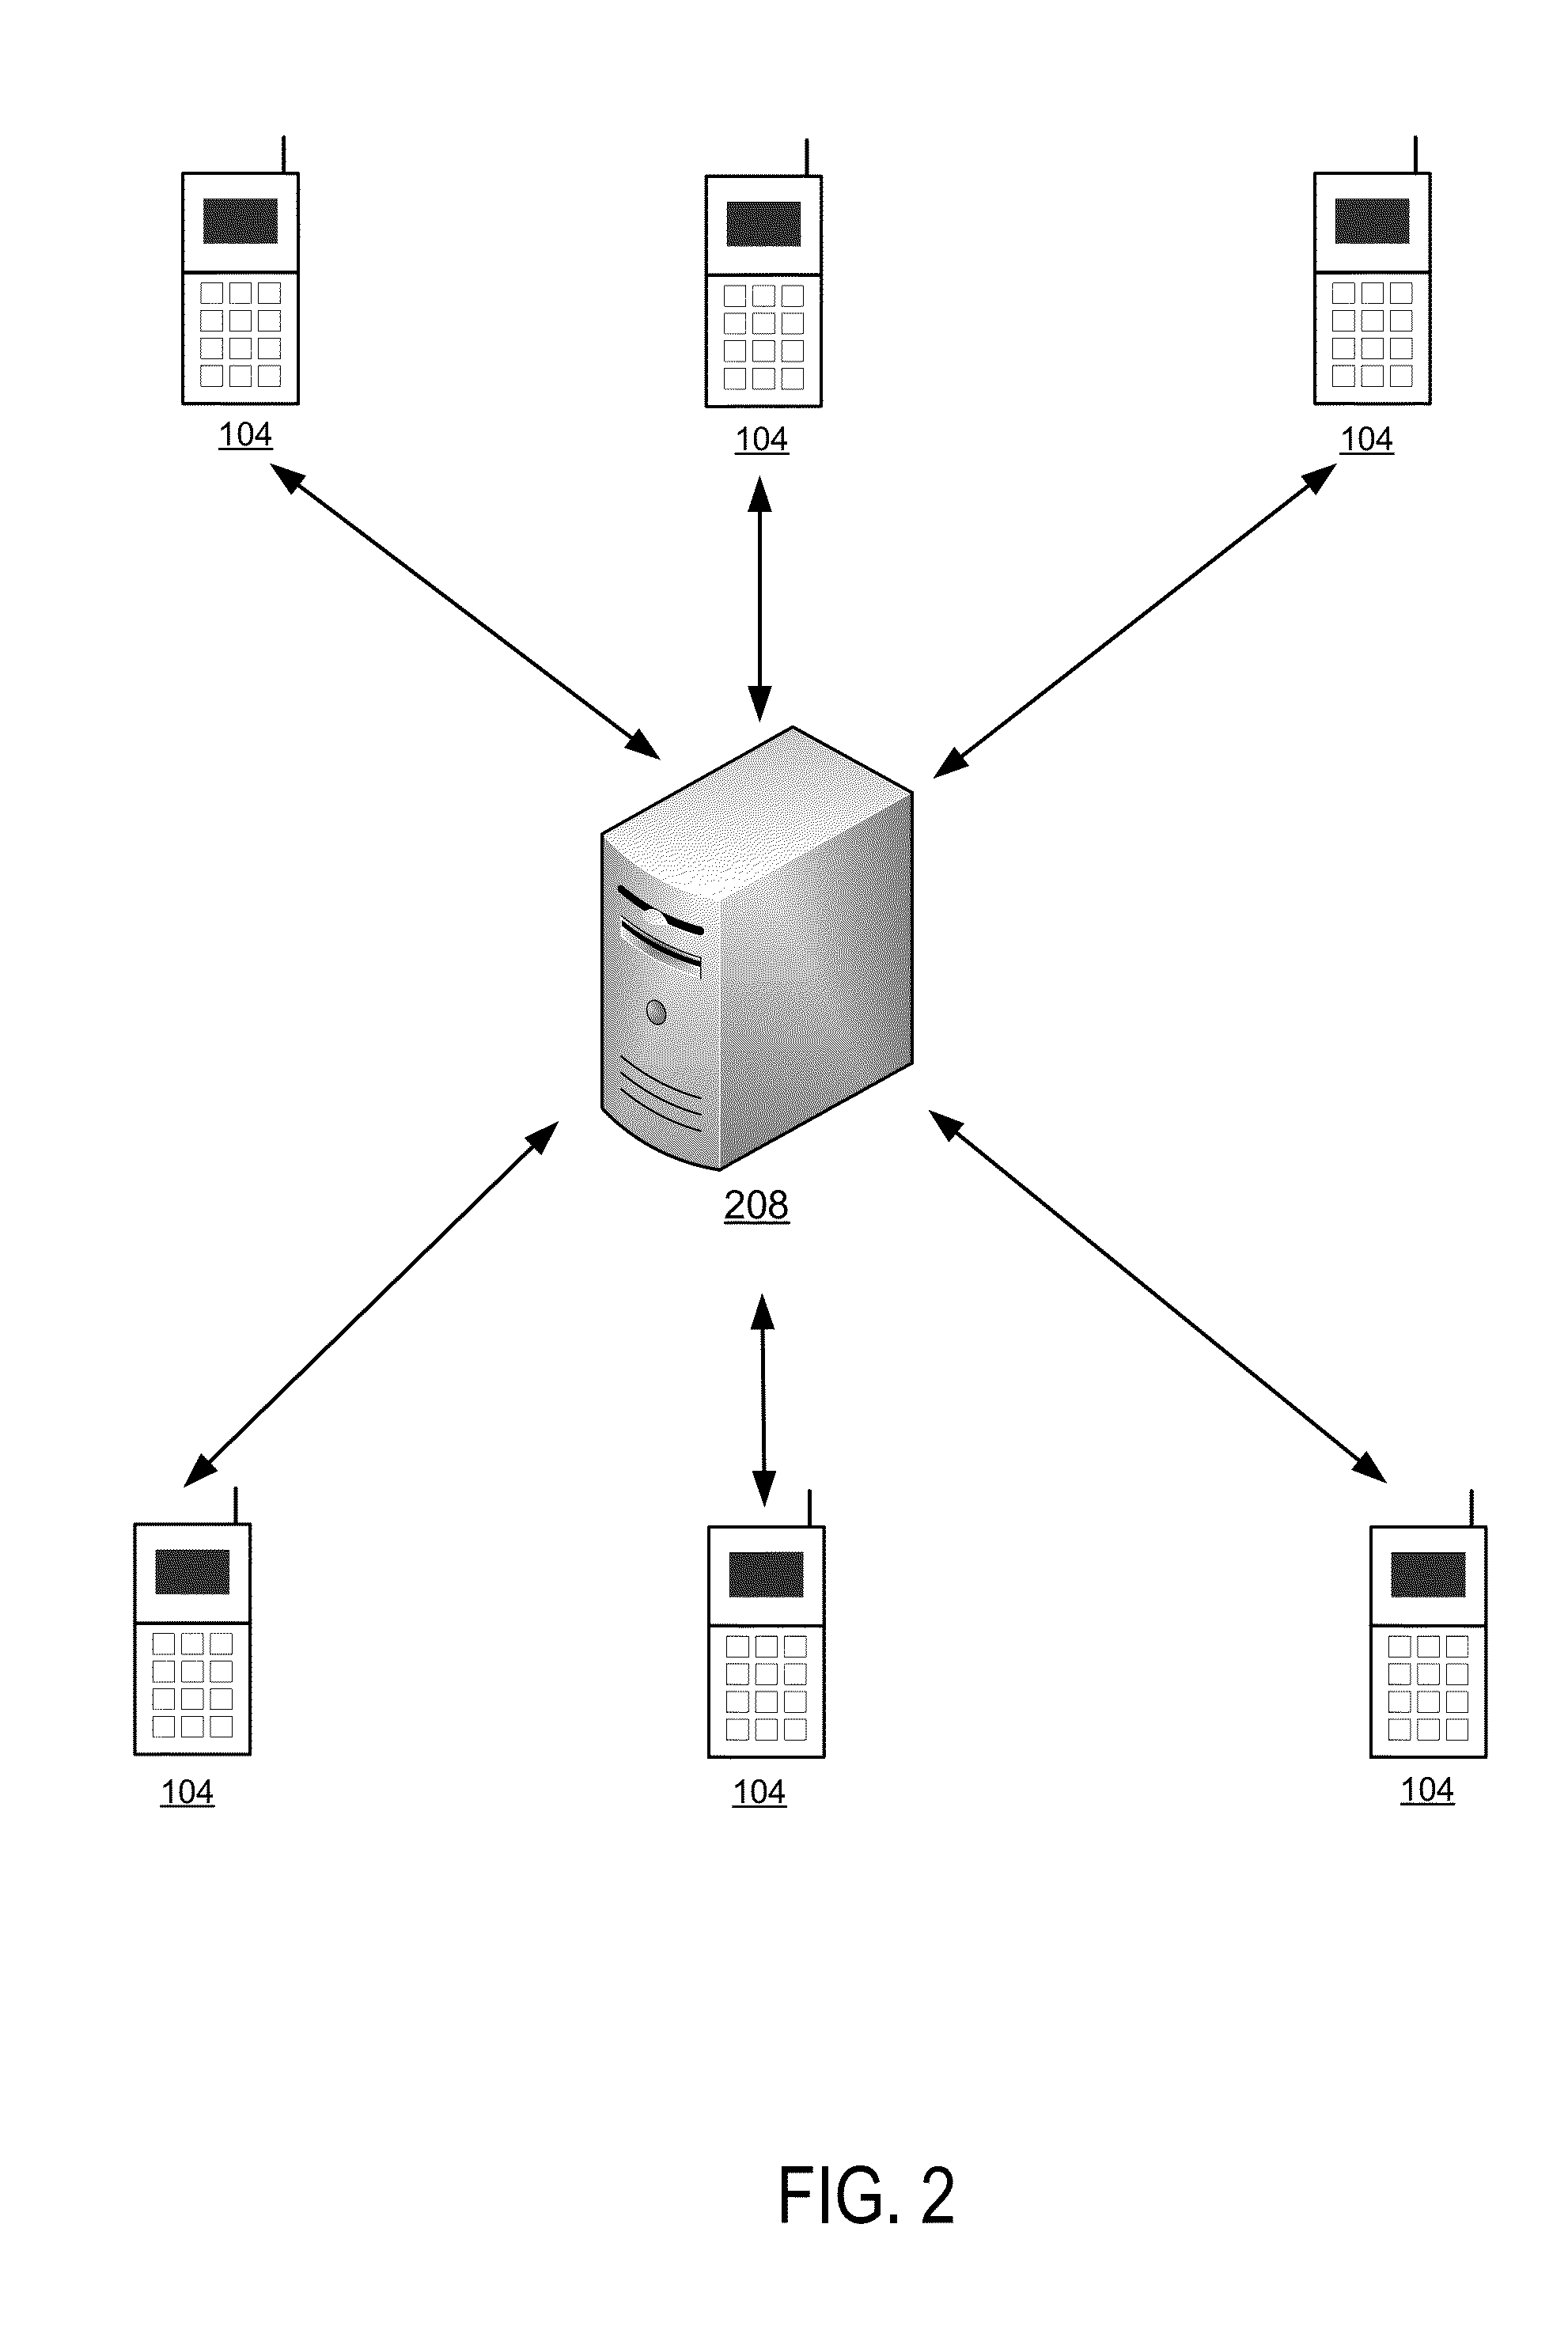 Methods for providing a navigation route based on network availability and device attributes